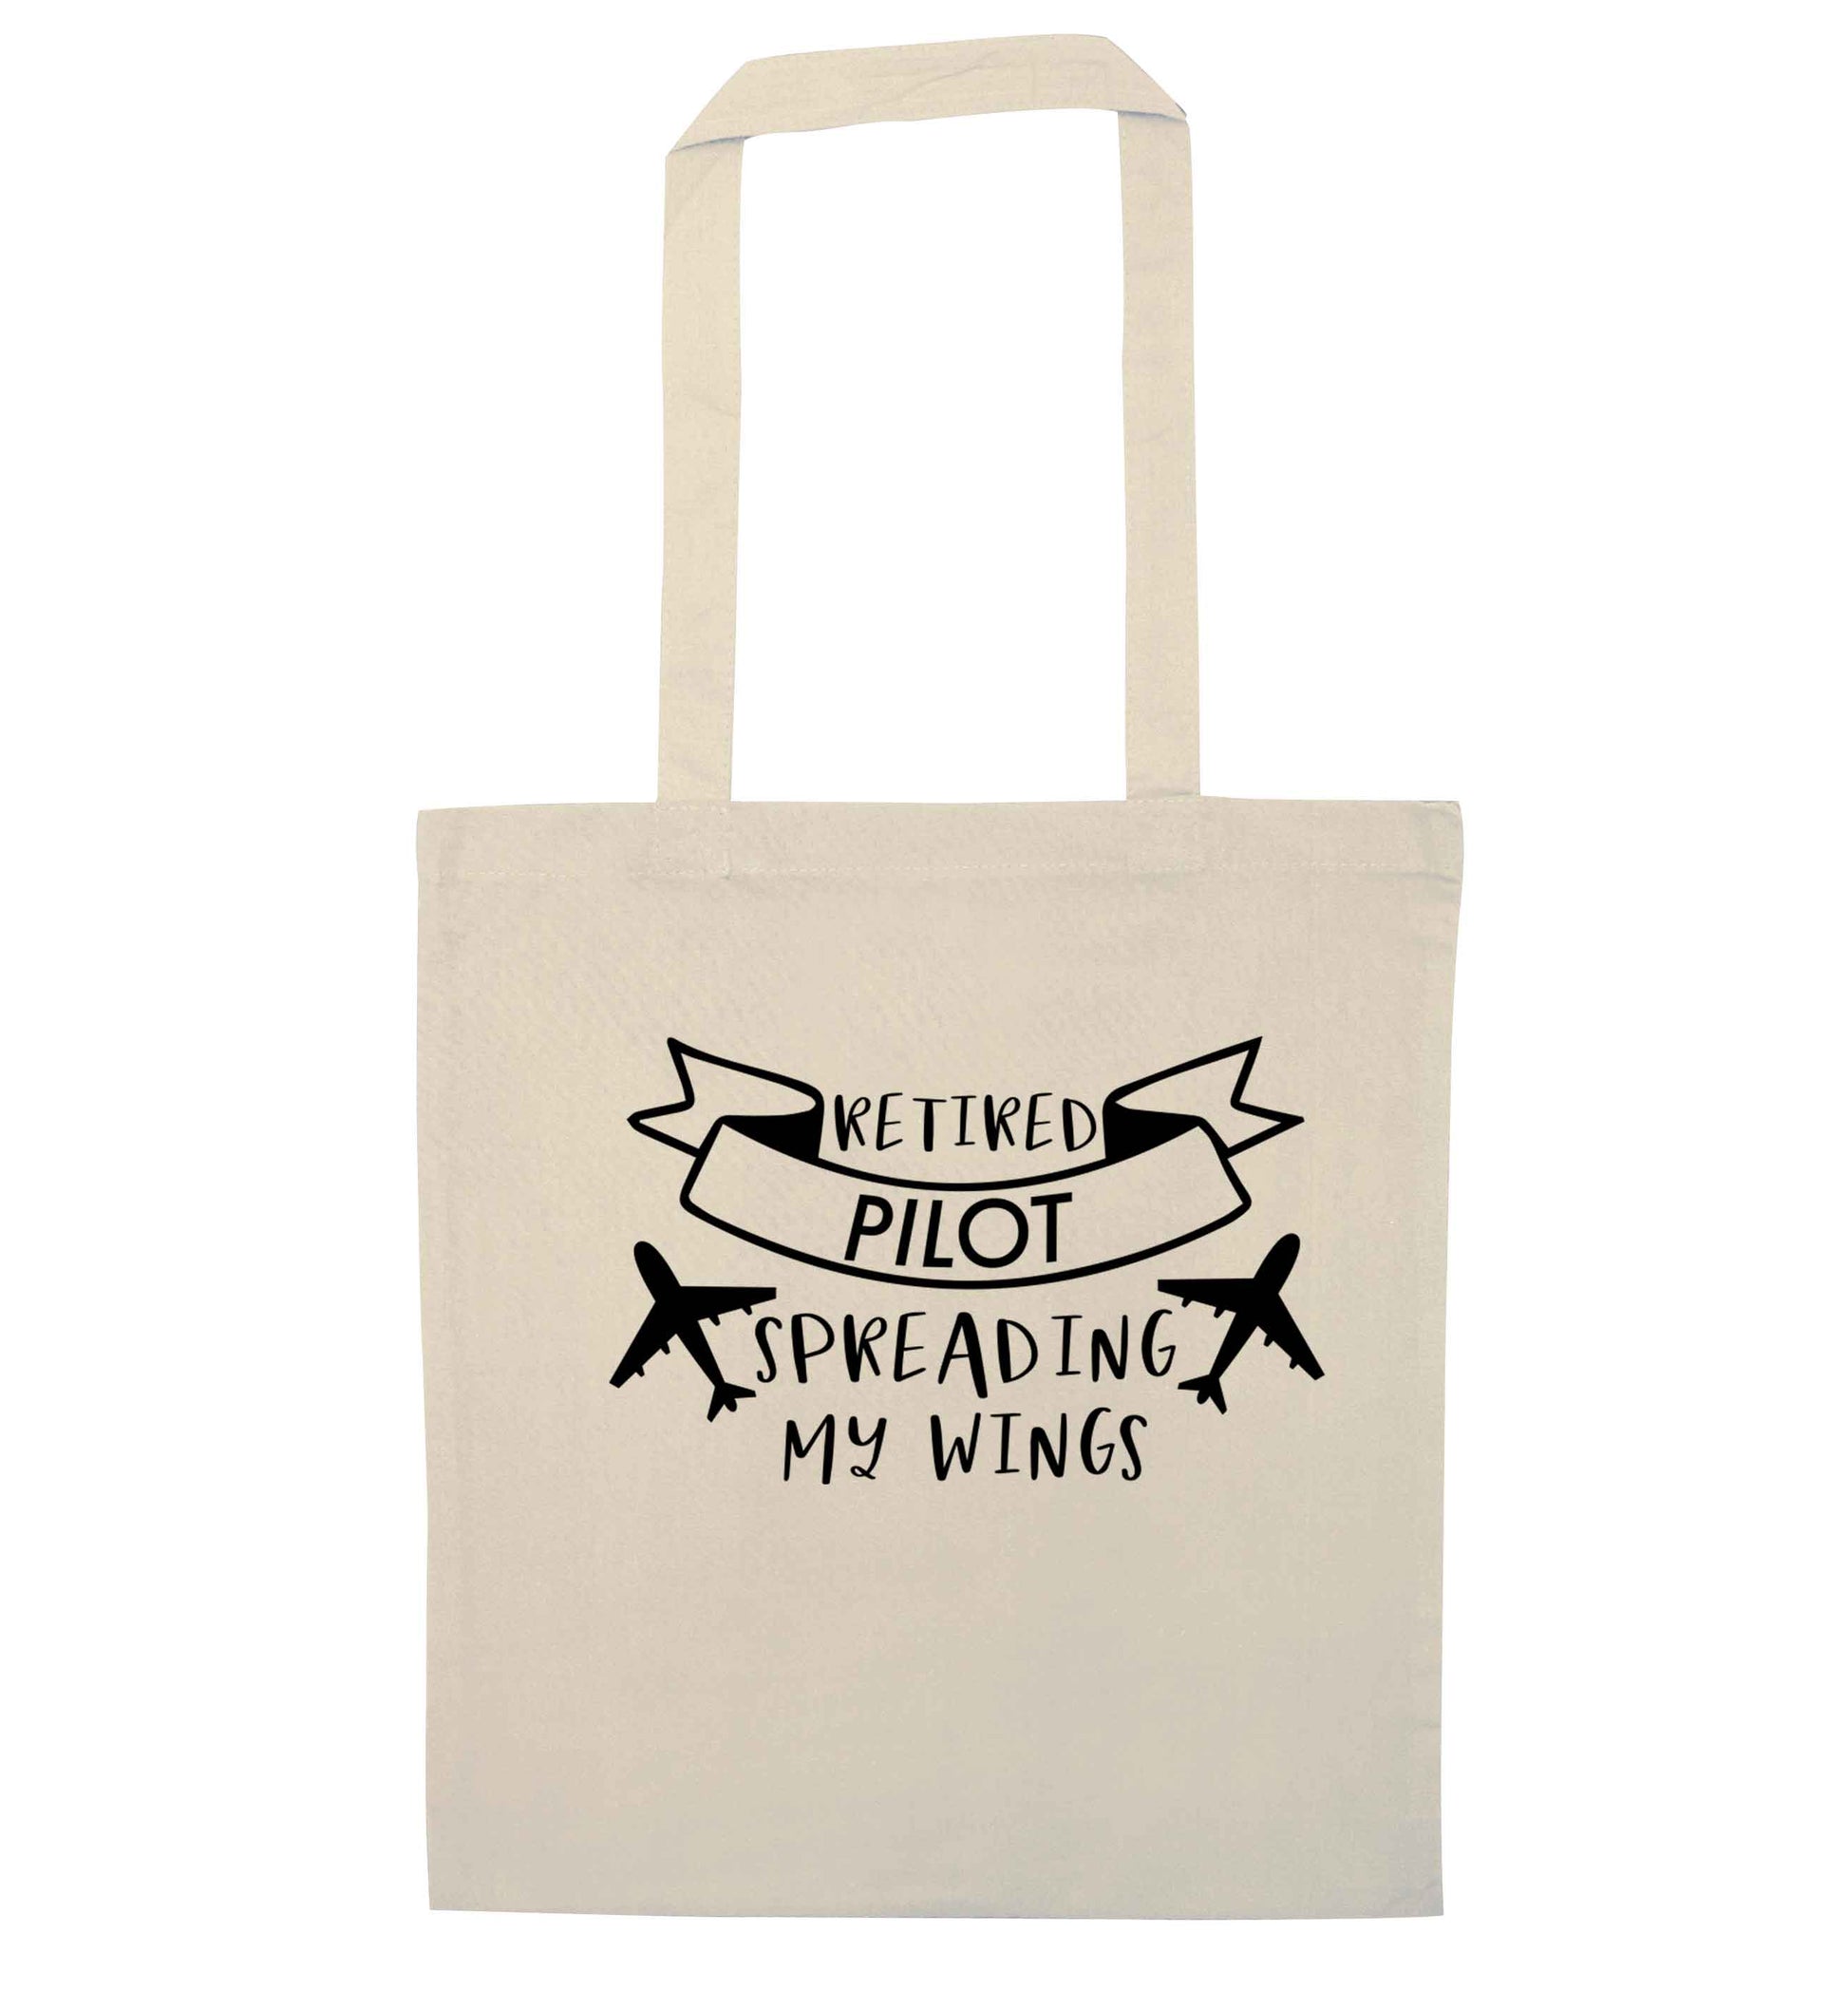 Retired pilot spreading my wings natural tote bag